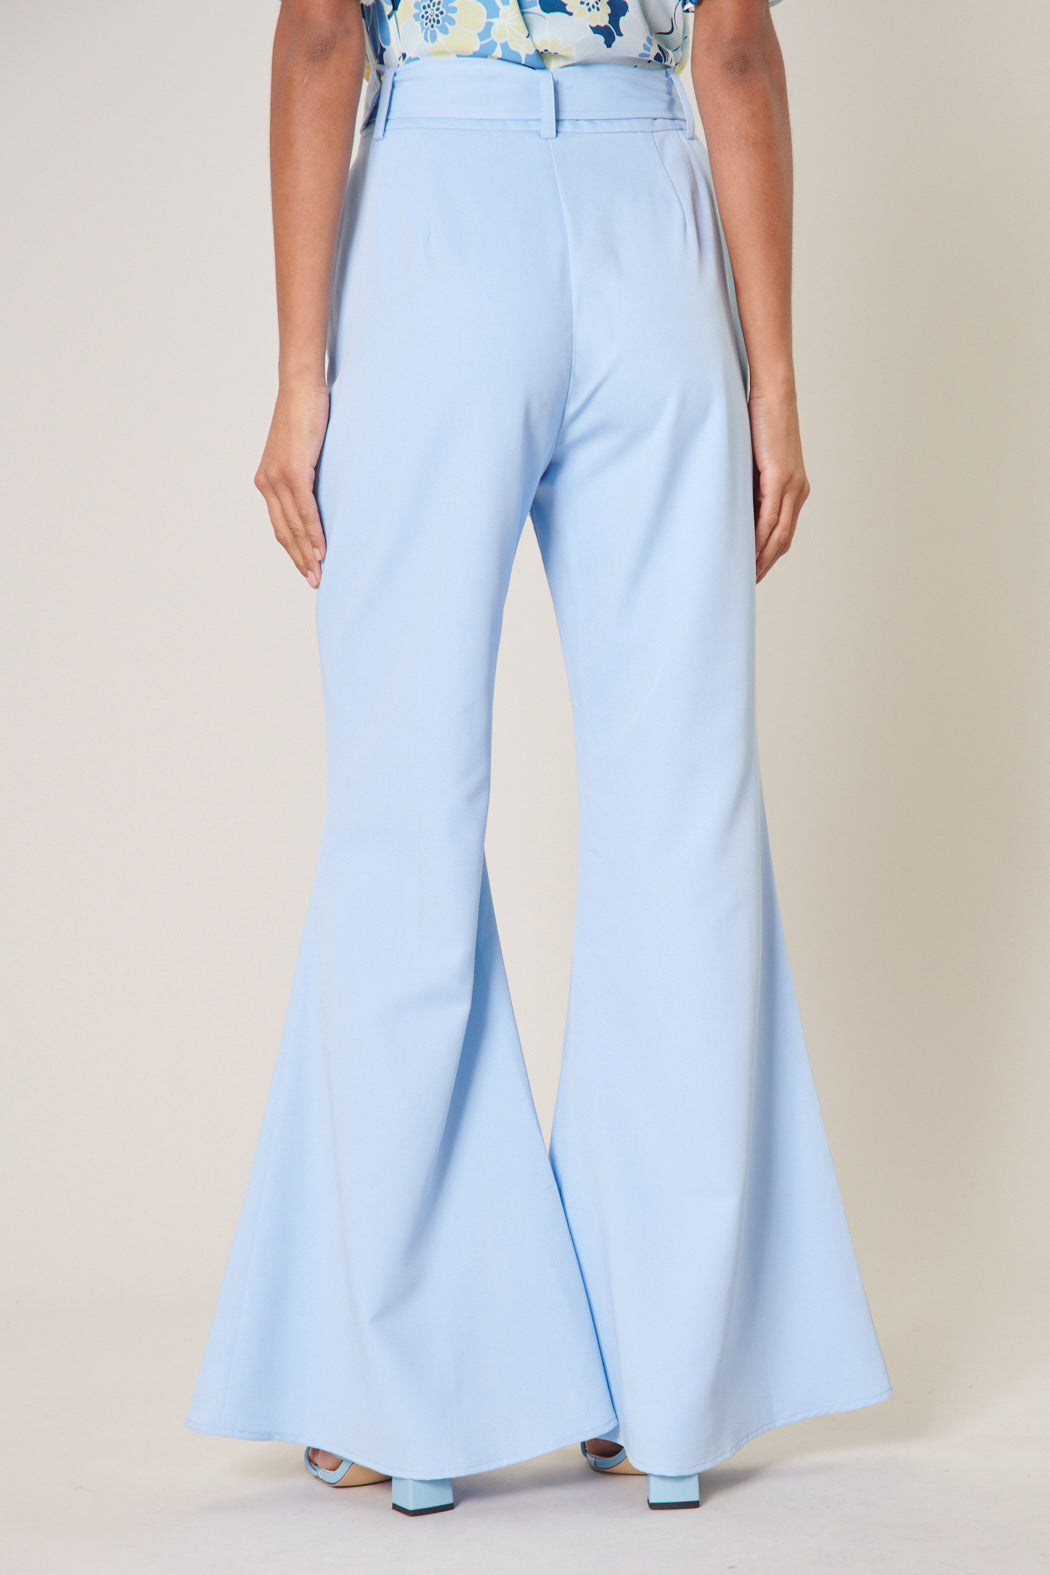 Power Moves Bell Bottom Pants – Sugarlips